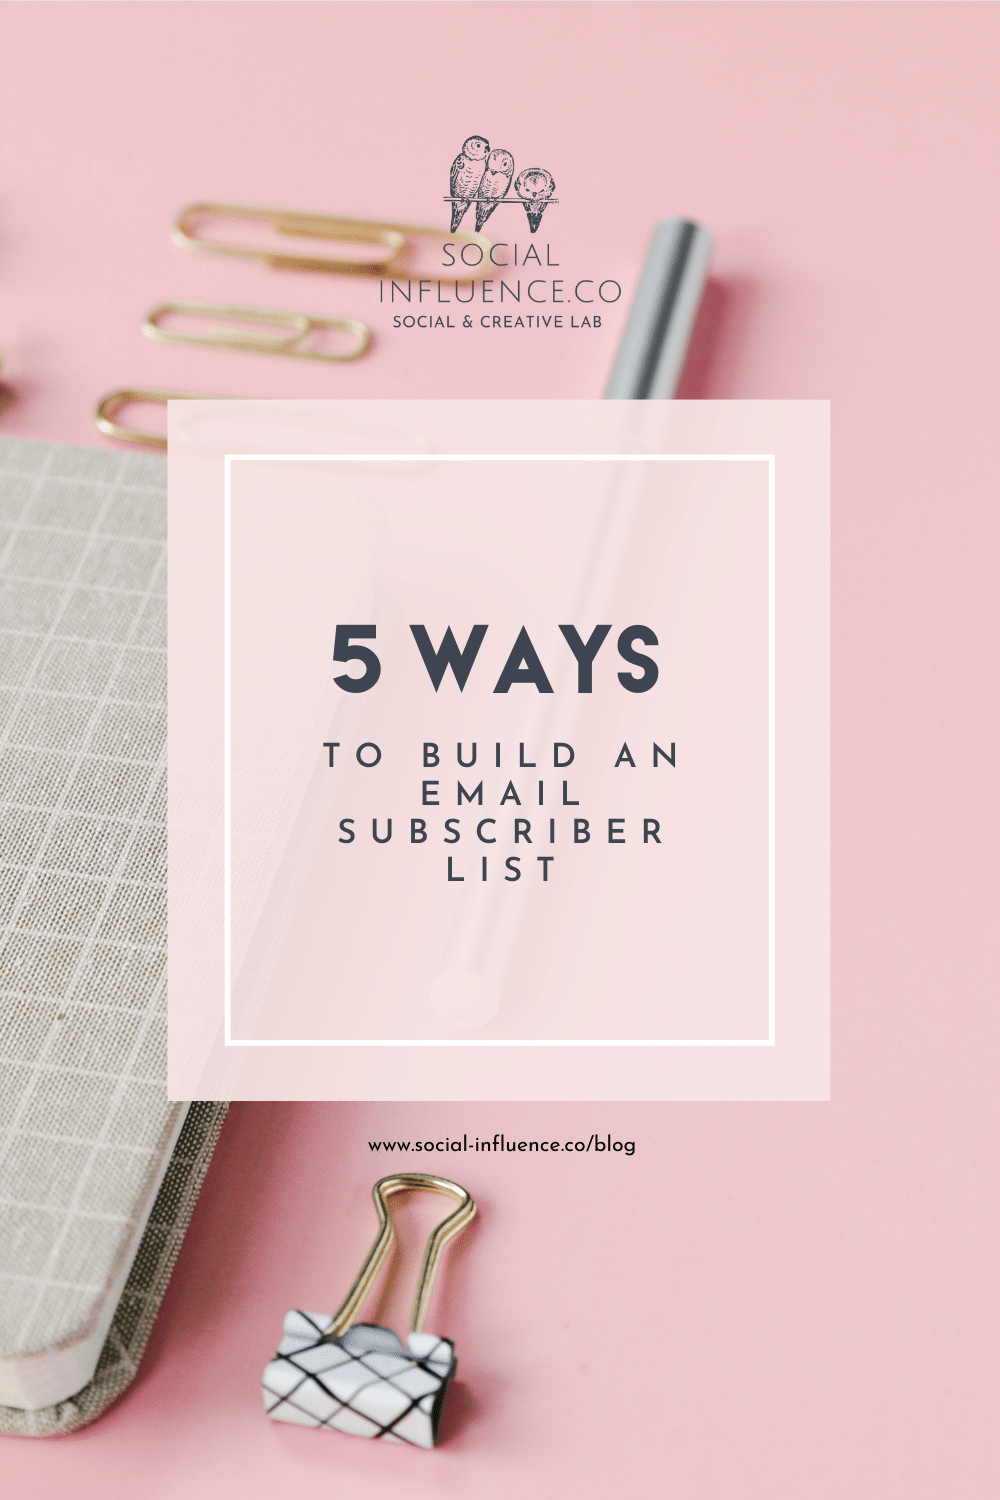 5 ways to build an email subscriber list